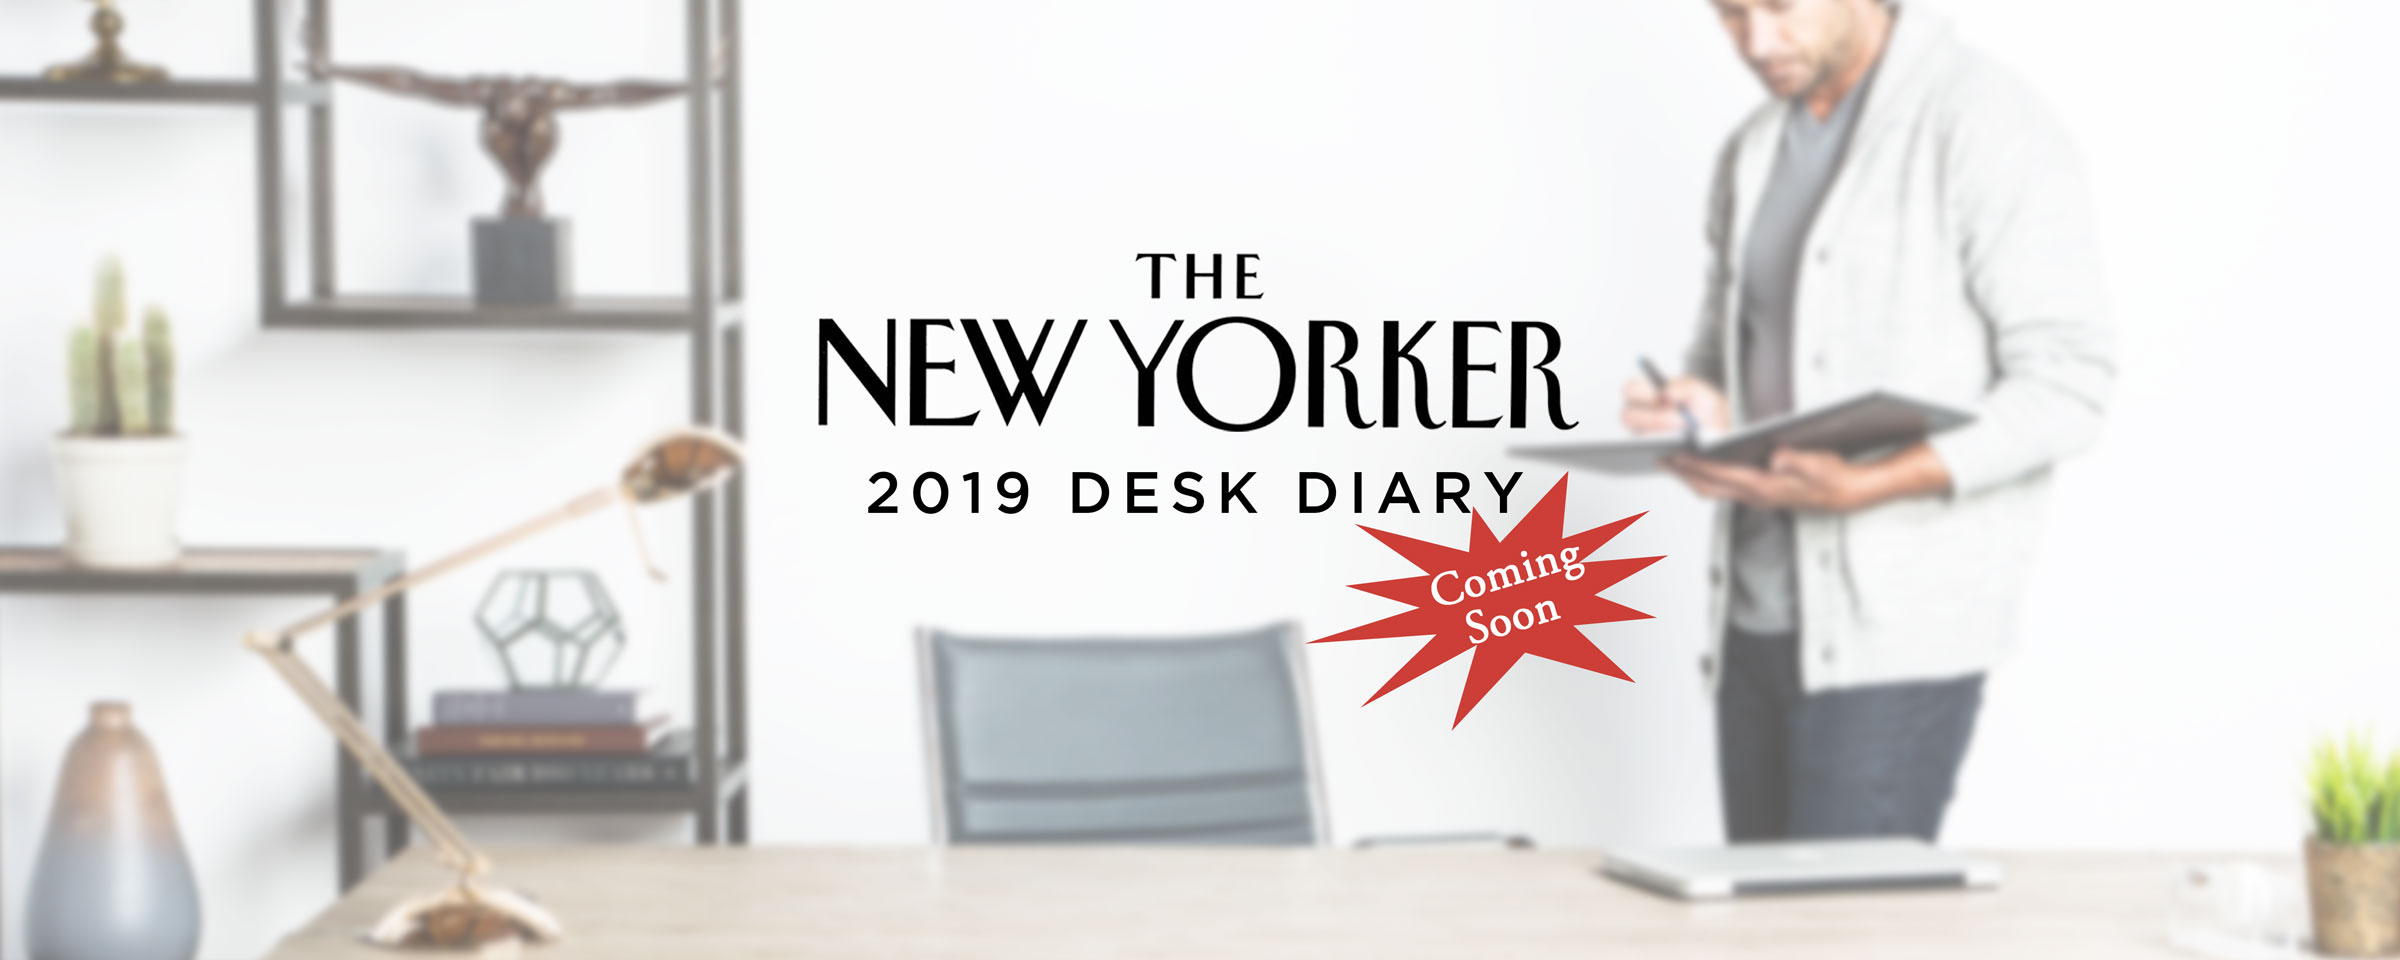 The New Yorker Desk Diary 2019